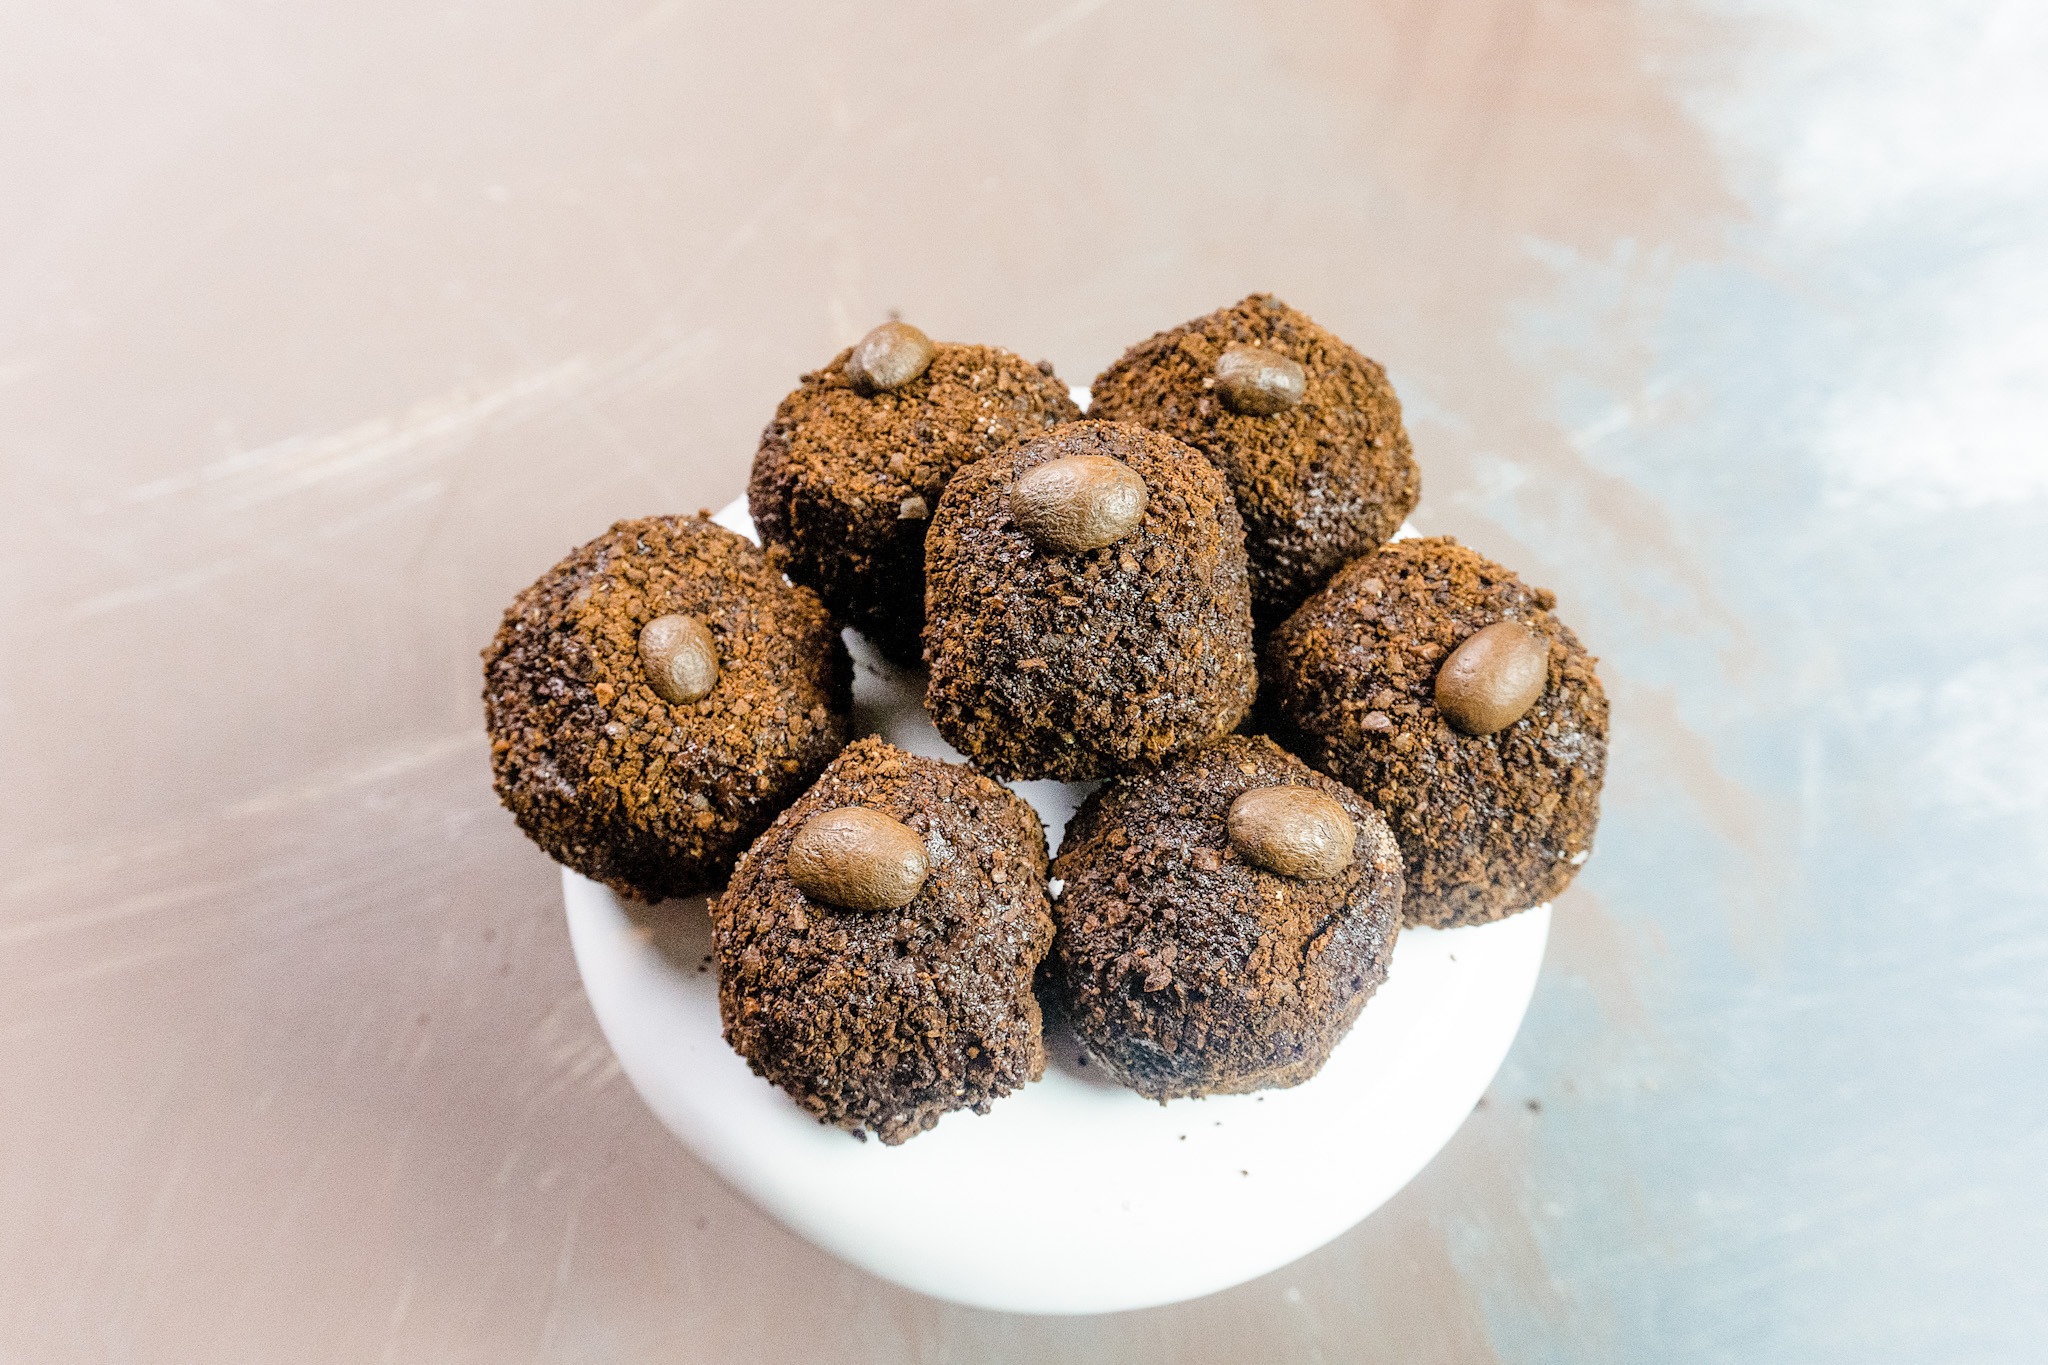 Simple Mocha Espresso Truffle Recipe | 3 Ingredients and Naturally ...